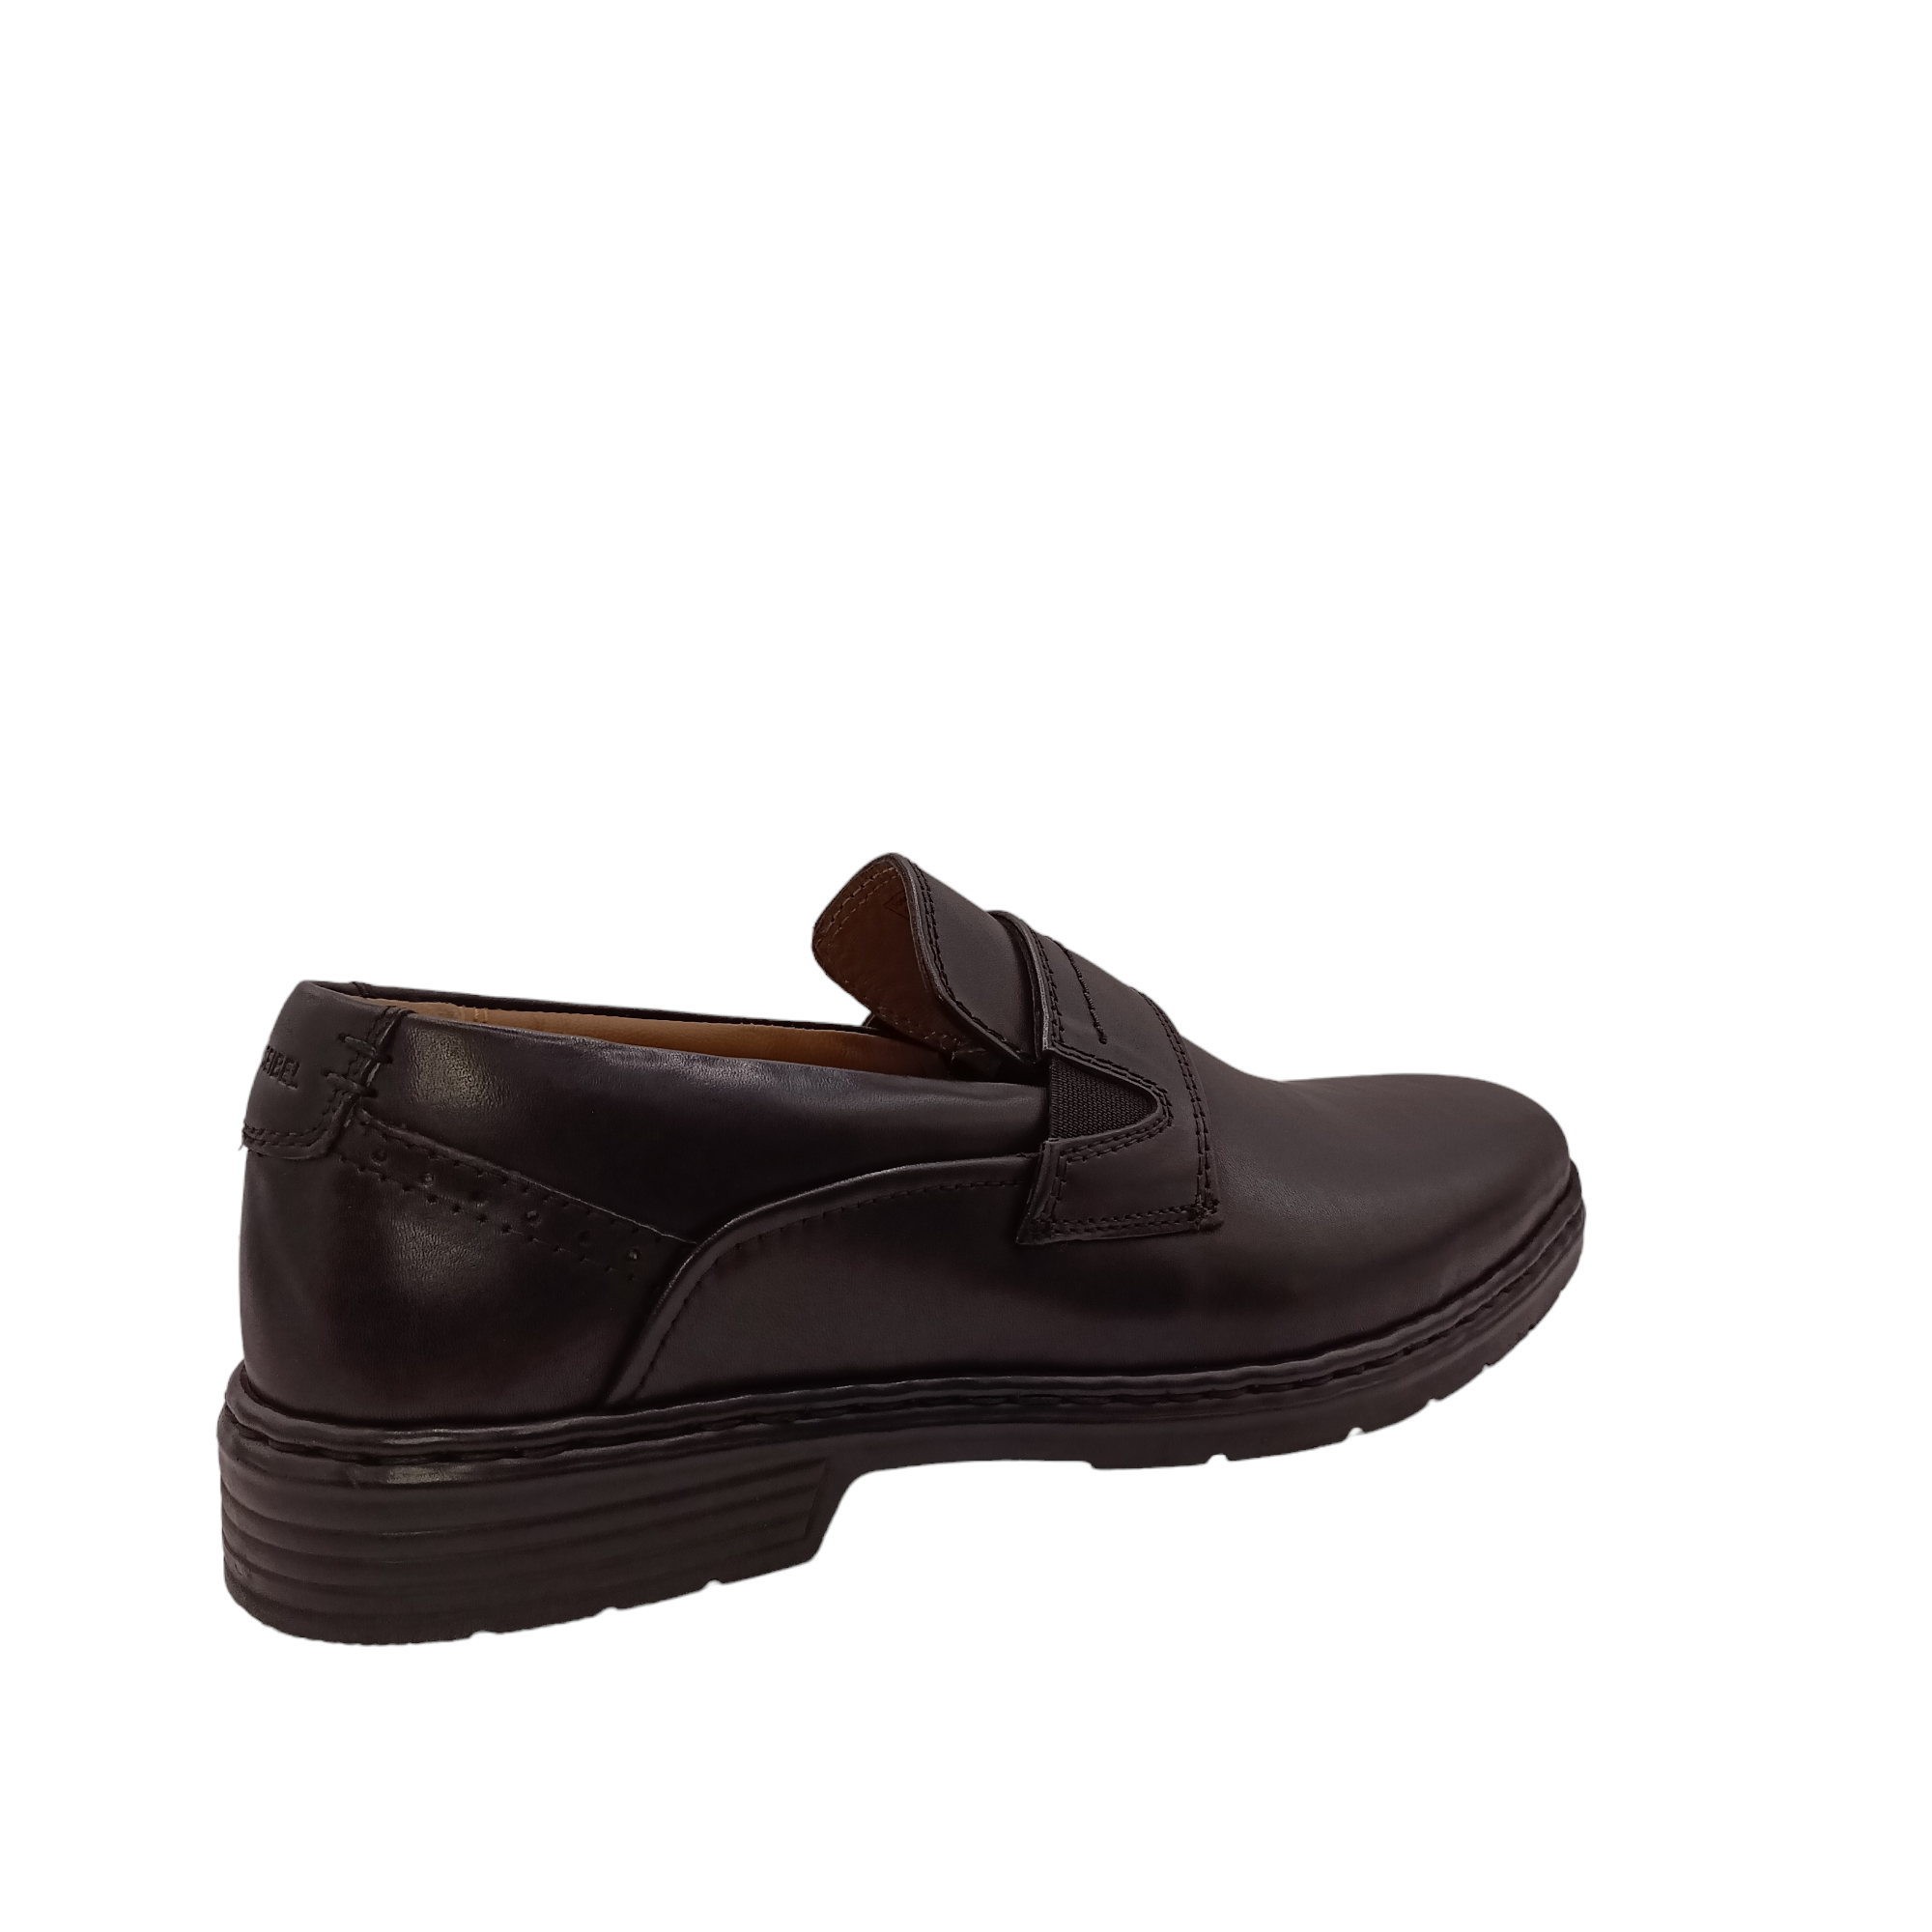 Shop Alastair 15 Josef Seibel - with shoe&me - from Josef Seibel - Shoes - Mens, Shoe, Winter - [collection]